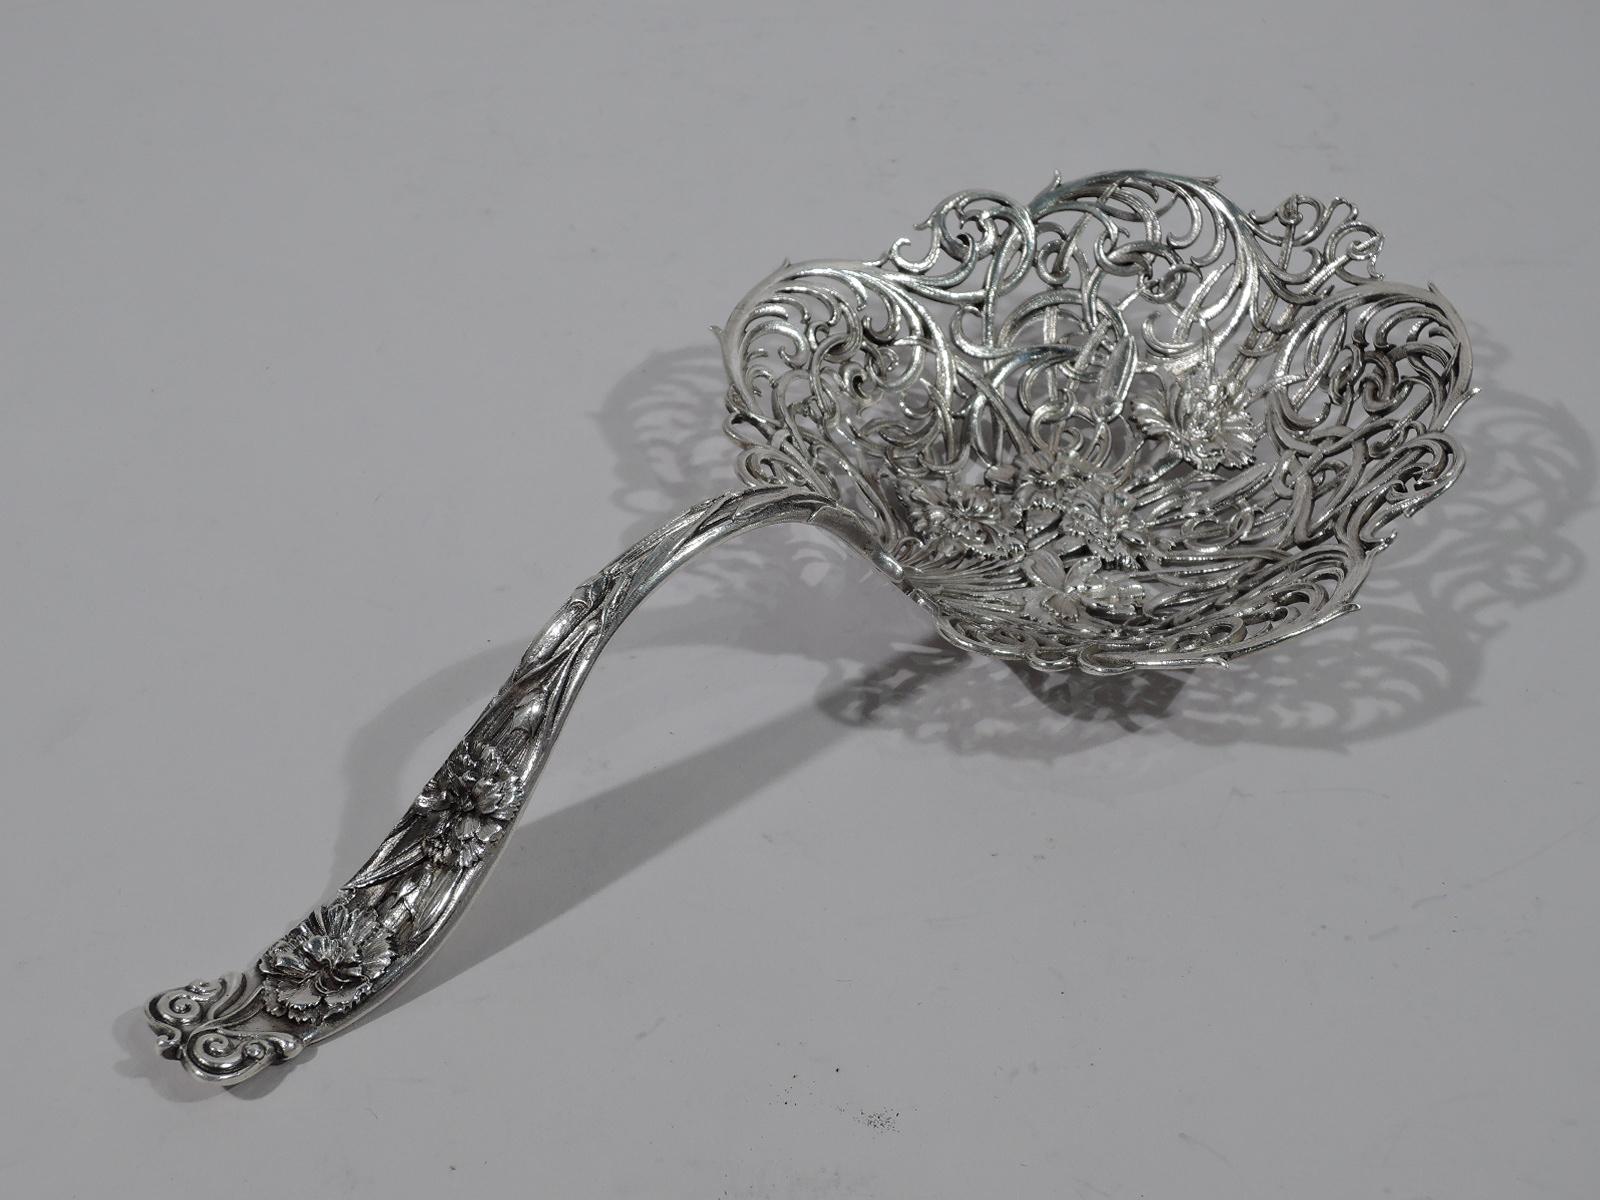 Art Nouveau sterling silver bonbon scoop. Made by Whiting in New York. Large shaped bowl with loose and interlaced scrollwork overlaid with flowers. Handle solid and curved with chased flowers and volute terminal. Turn-of-the-century freshness.